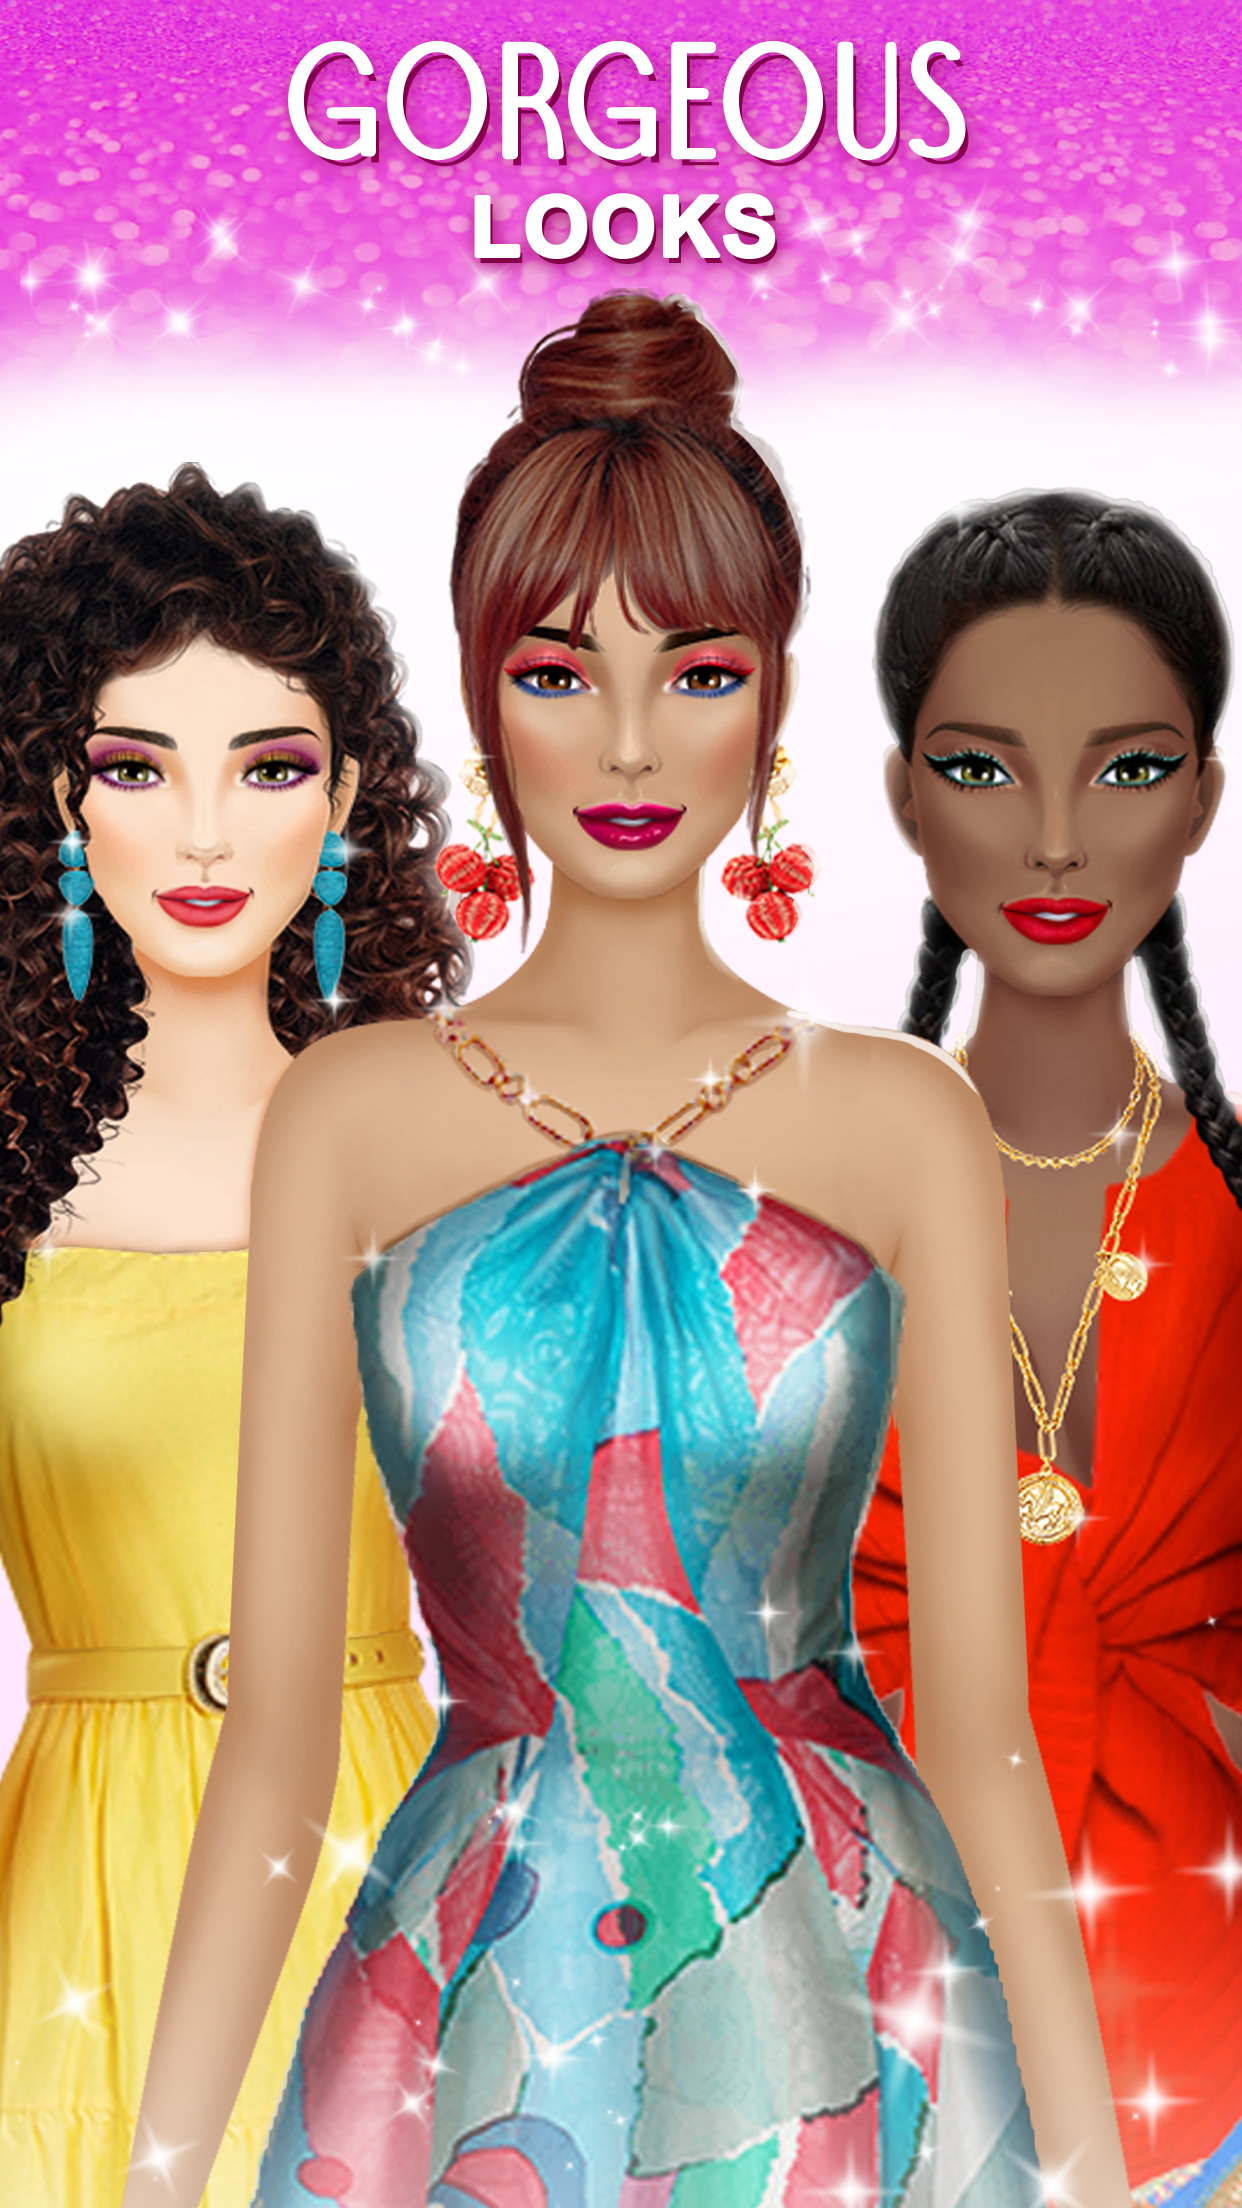 FASHION GAMES 👗 - Play Online Games!